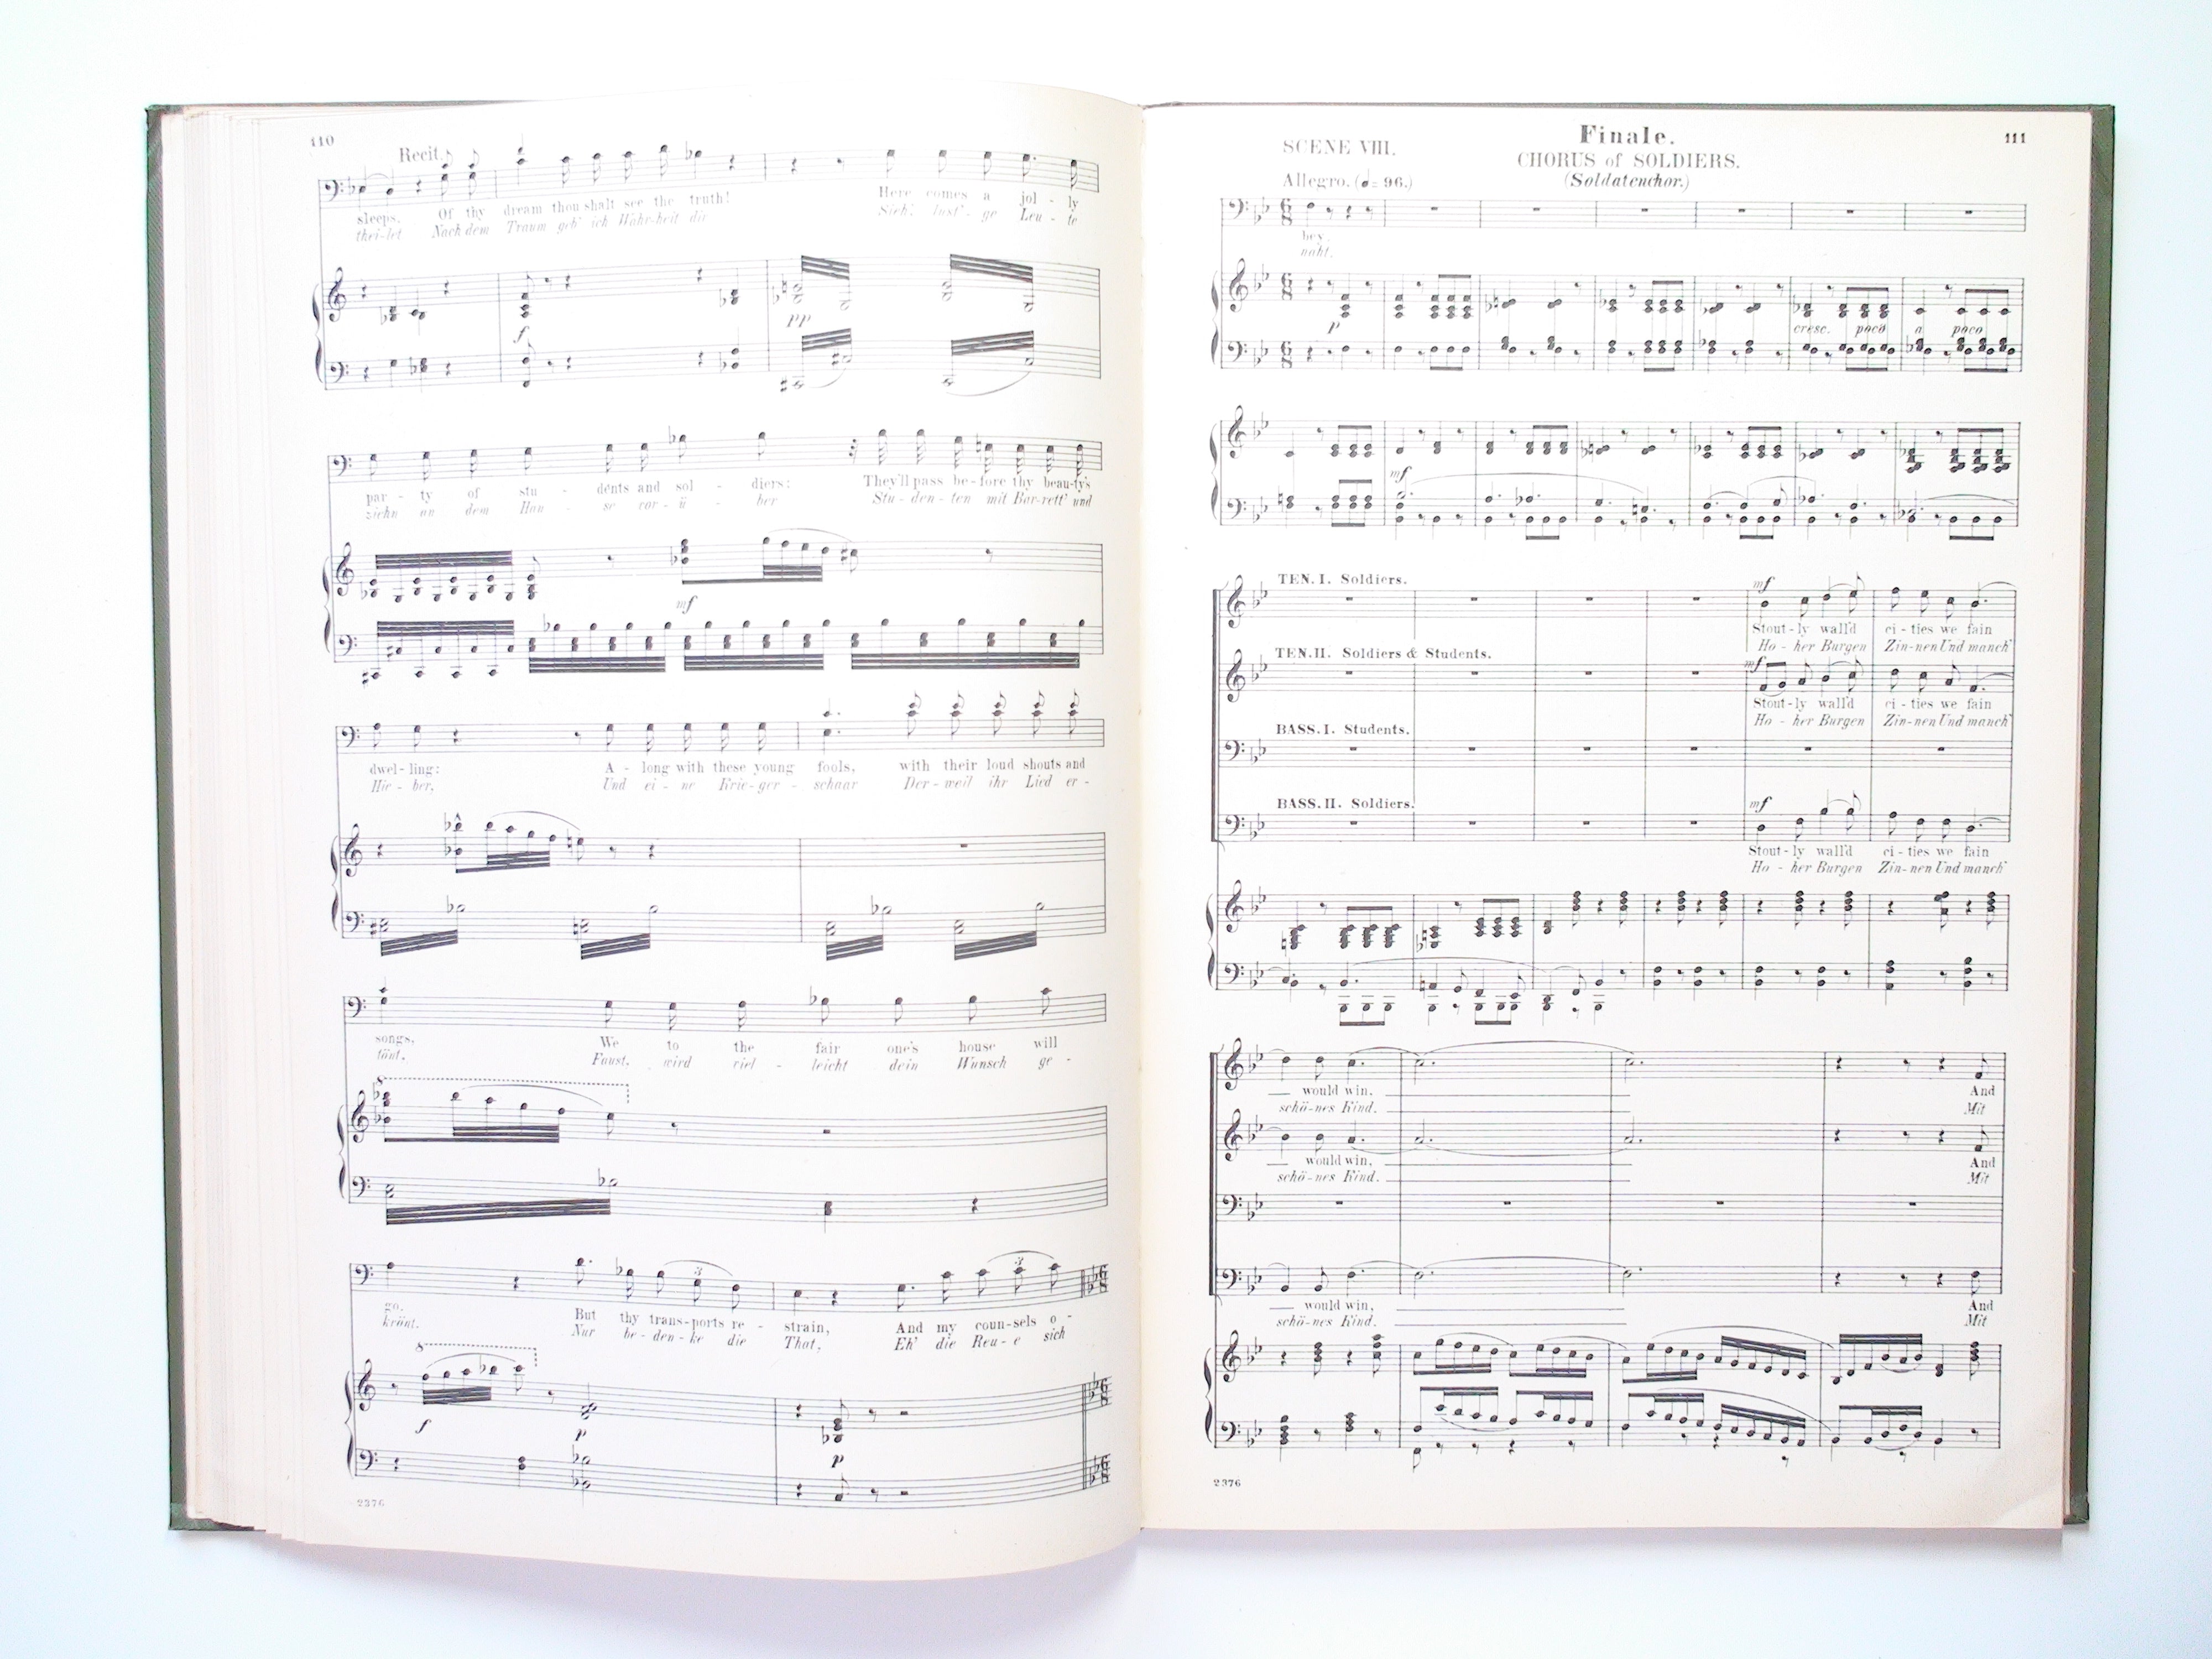 The Damnation of Faust, Music by Hector Berlioz, Vocal Score, G. Schirmer, c1880